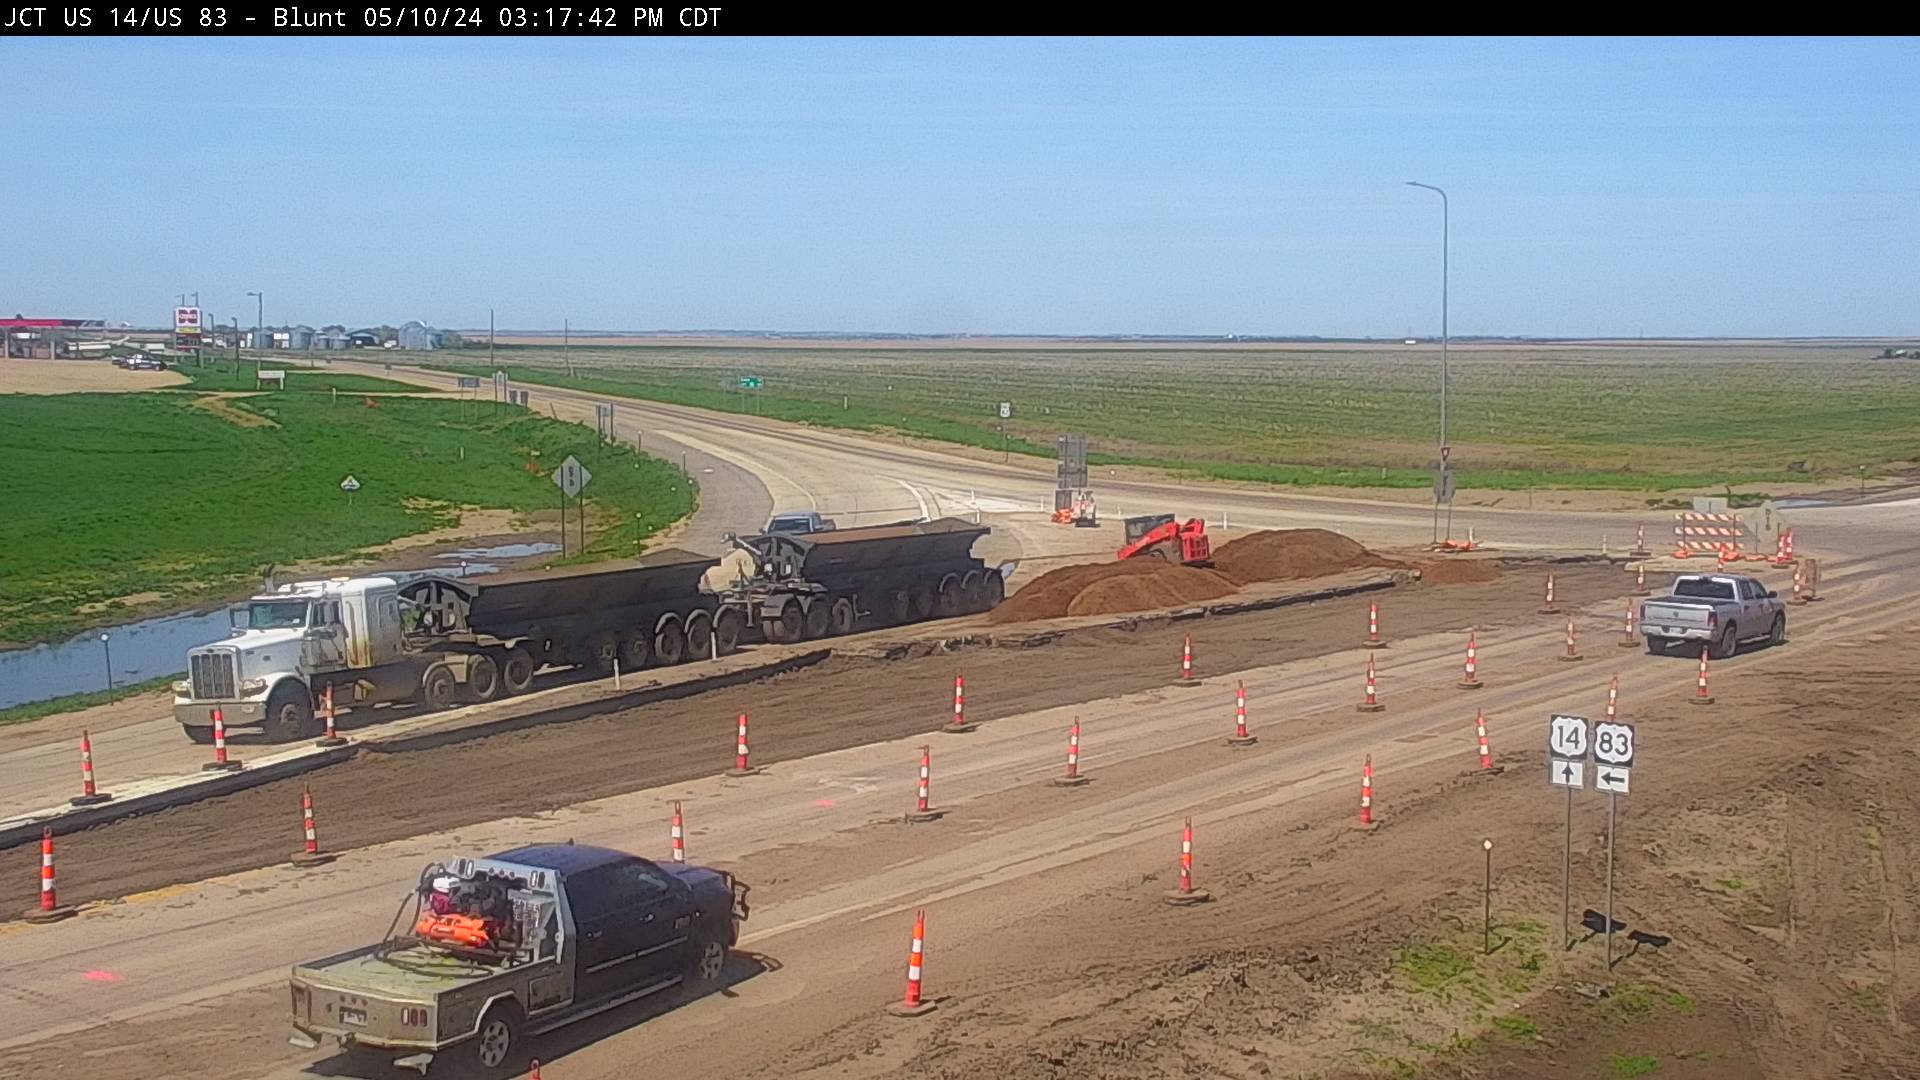 4 miles west of town at US-14 & US-83 - North Traffic Camera